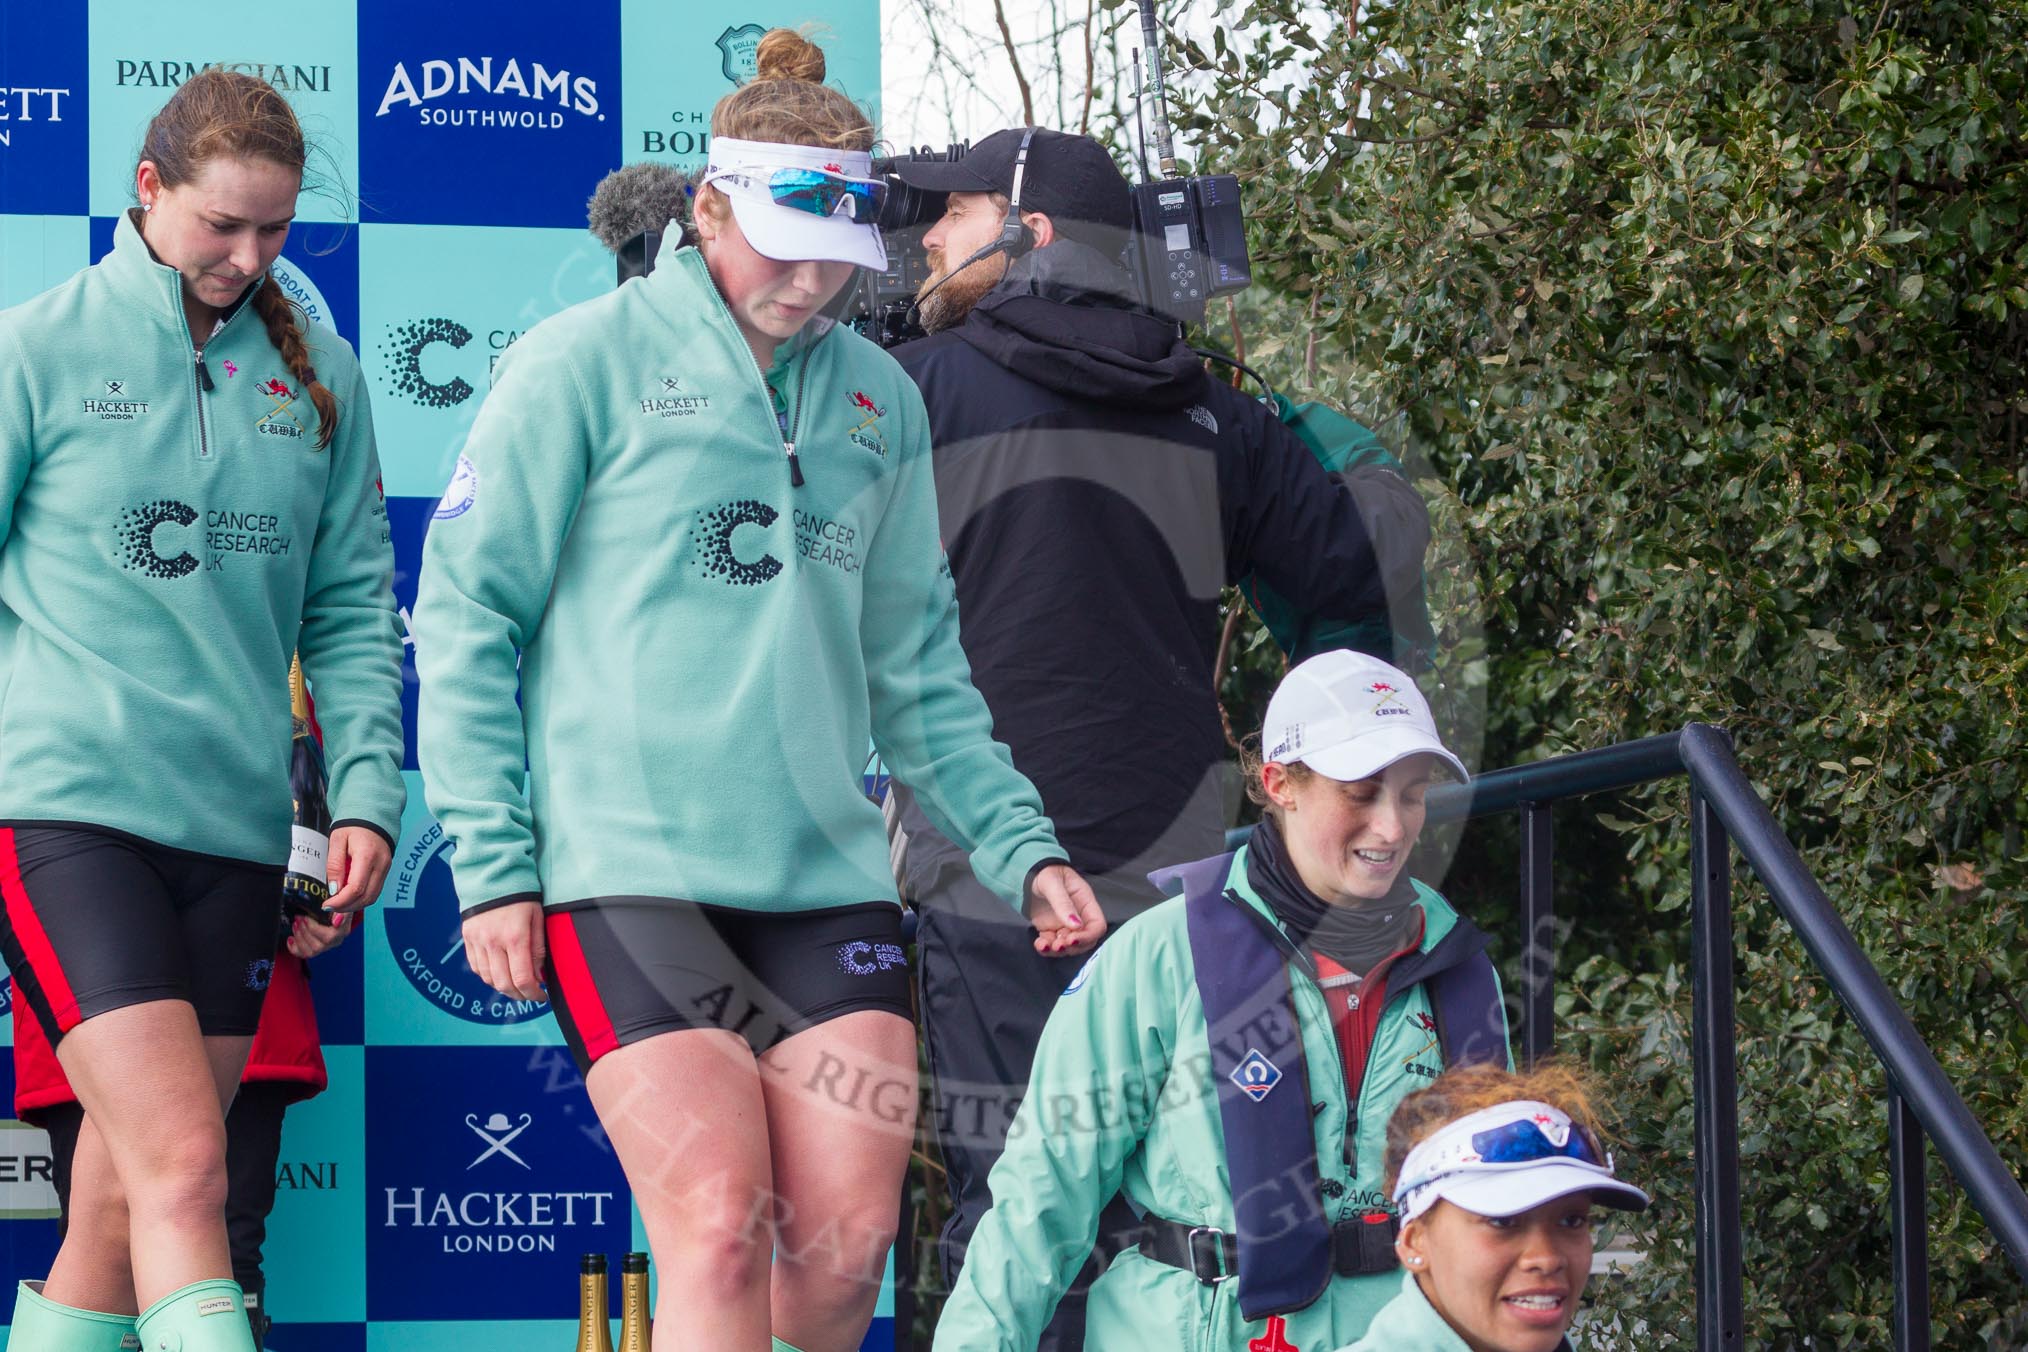 The Boat Race season 2016 -  The Cancer Research Women's Boat Race.
River Thames between Putney Bridge and Mortlake,
London SW15,

United Kingdom,
on 27 March 2016 at 14:46, image #336